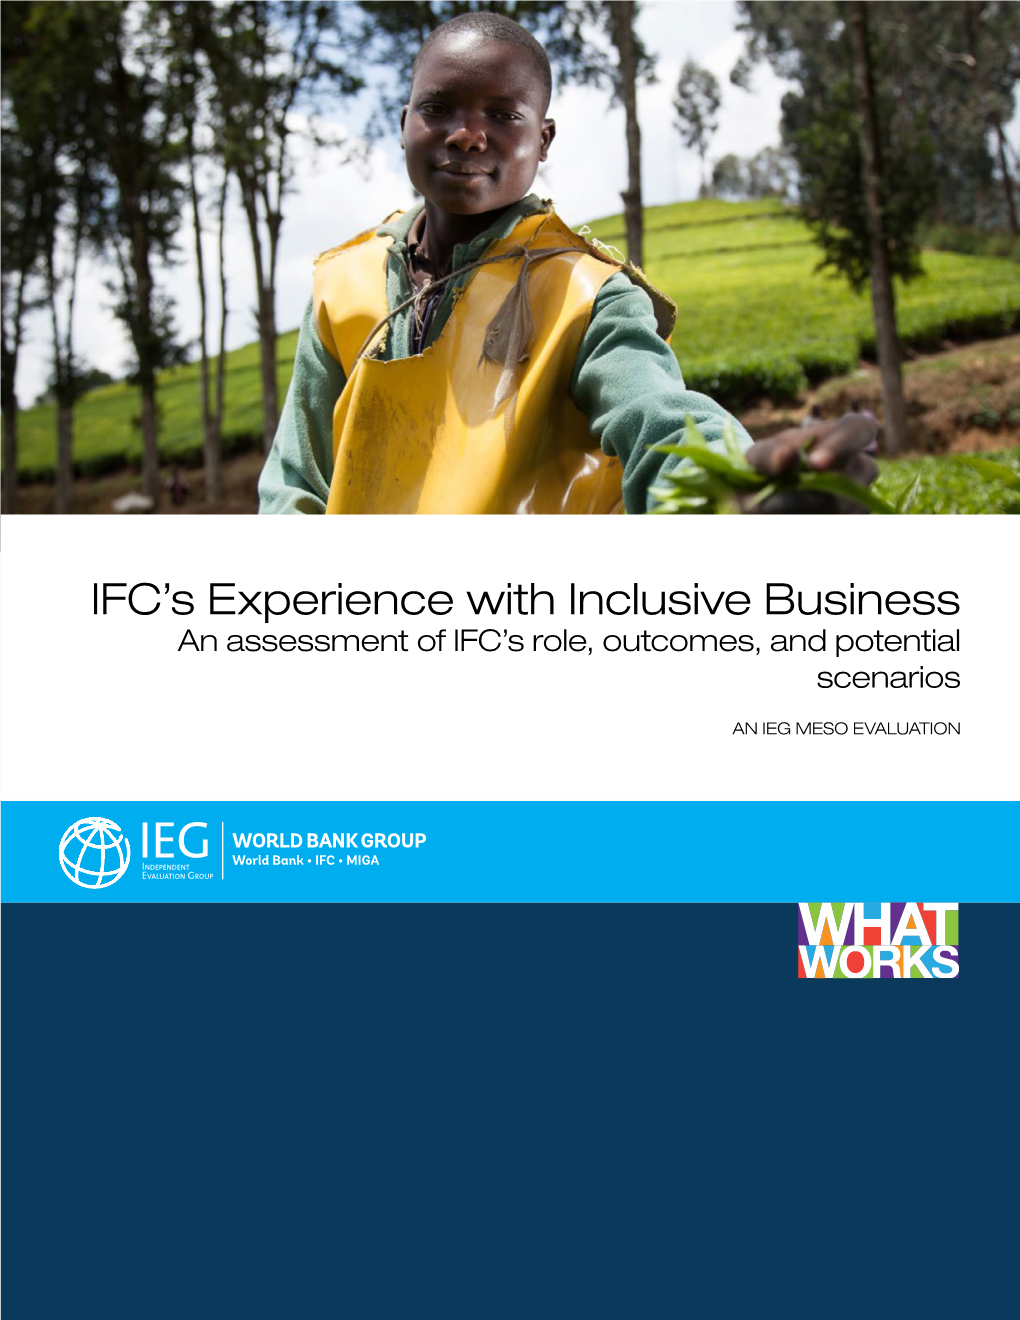 IFC's Experience with Inclusive Business